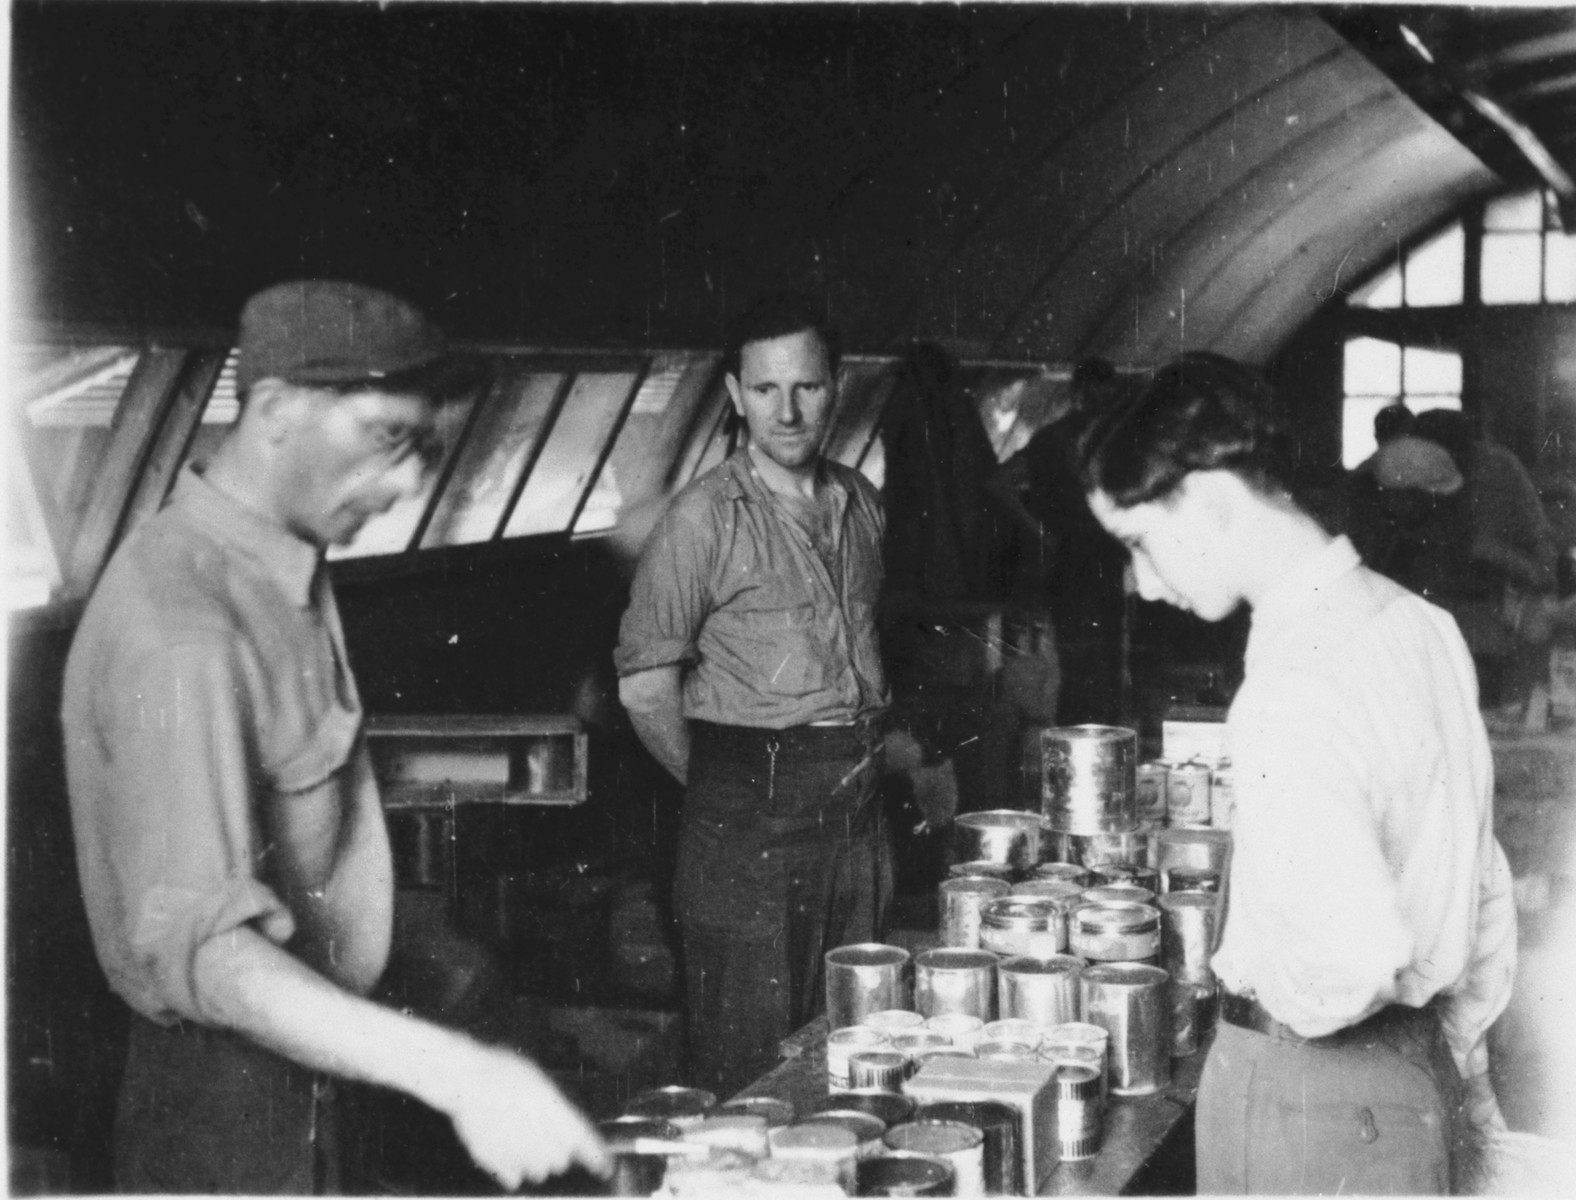 Jewish refugees in Shanghai either sort or distribute canned goods inside a quonset hut.